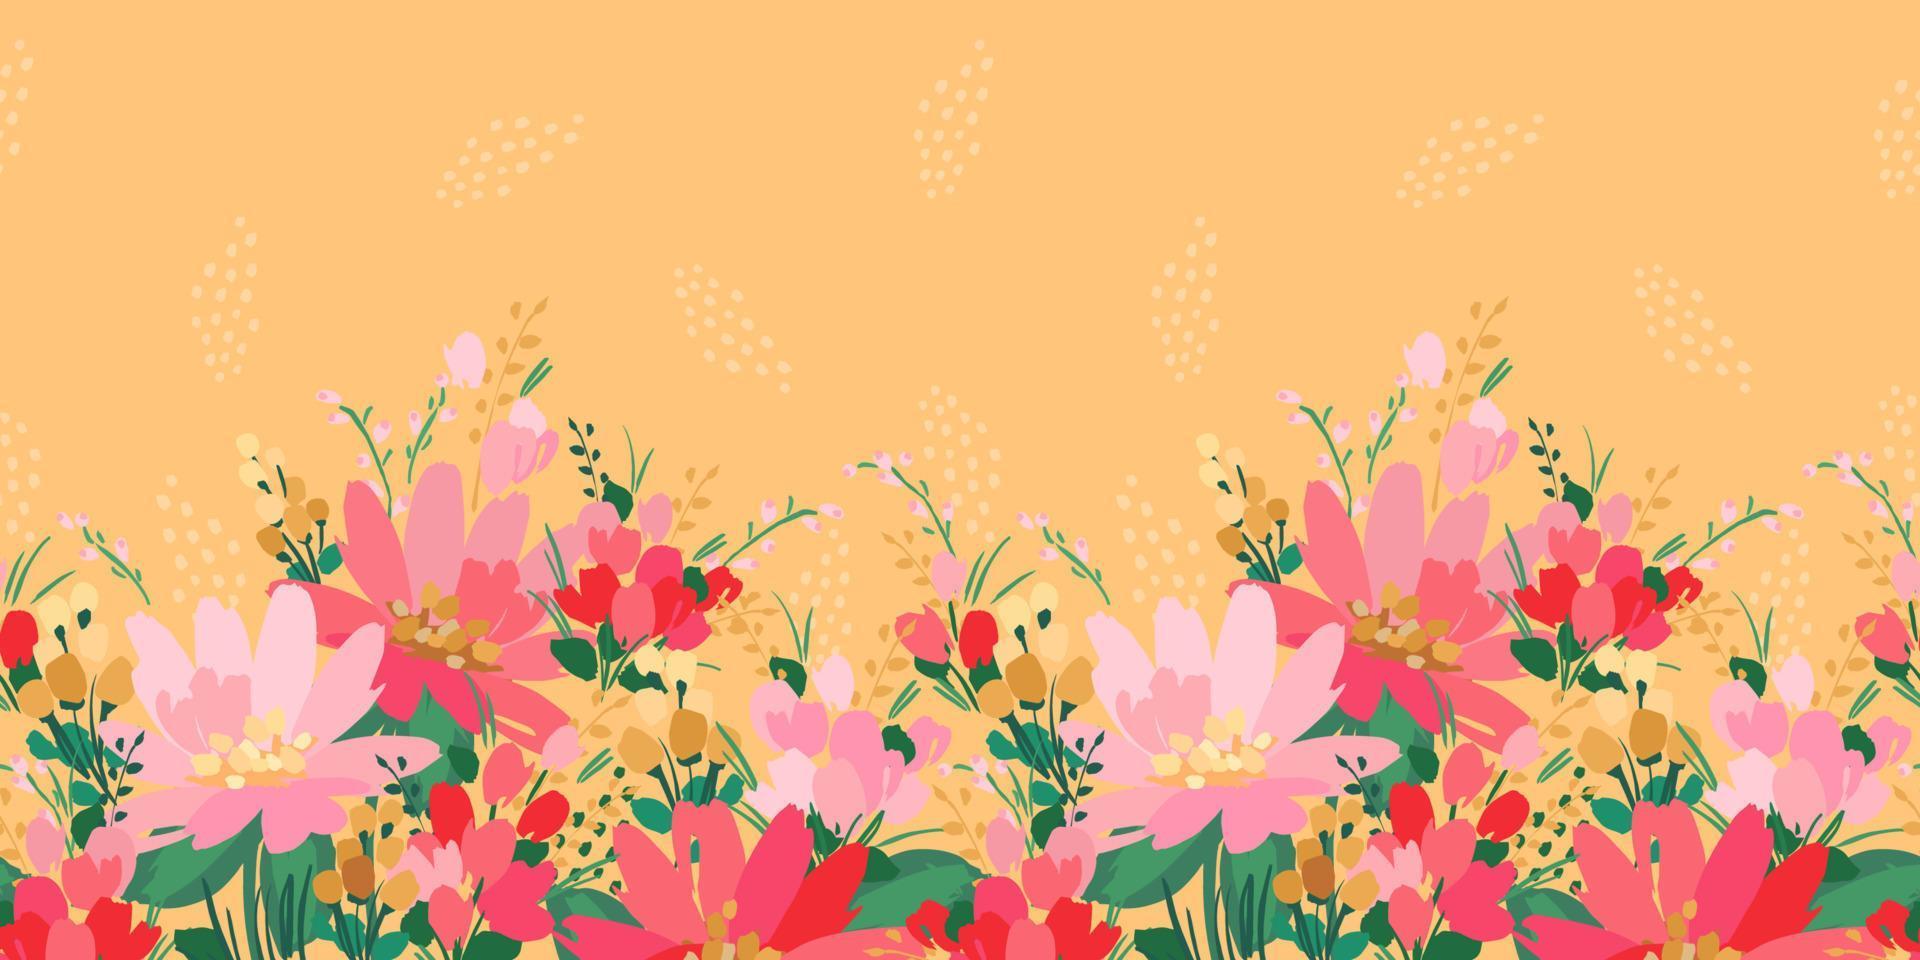 Floral seamless border. Vector design for paper, cover, fabric, interior decor and other use